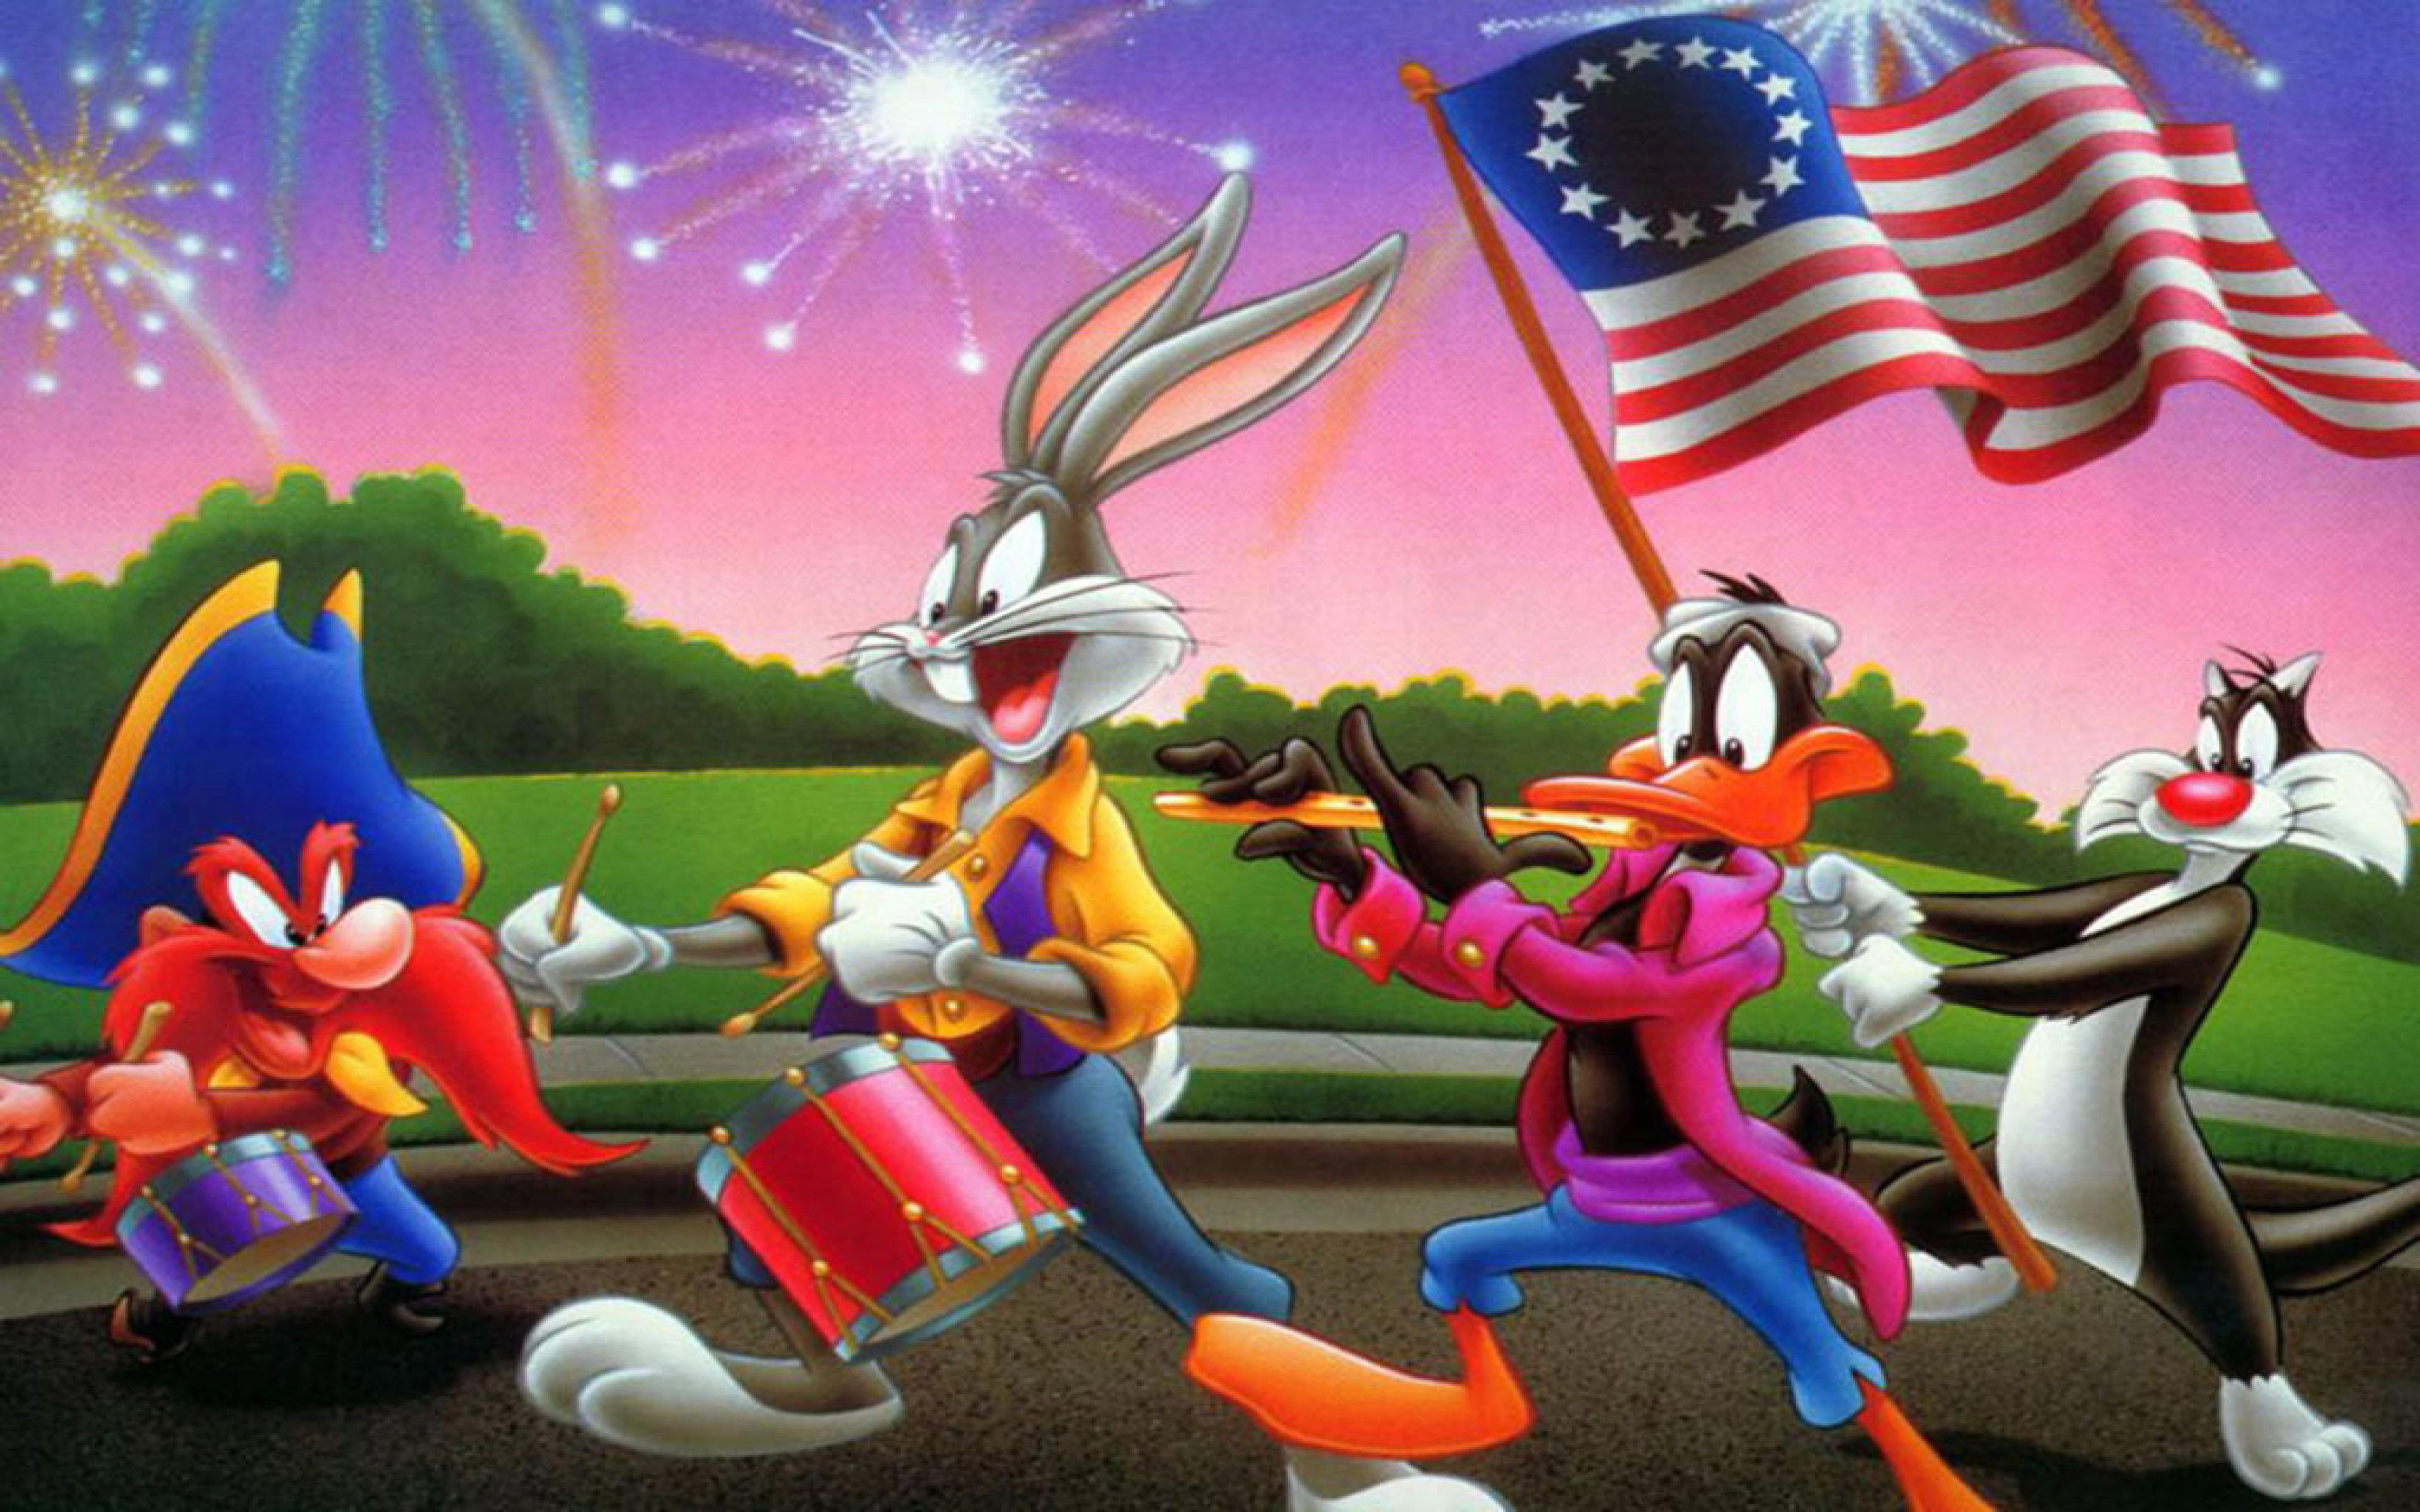 Cartoon Looney Tunes 4th Of July Yosemite Sam Bugs Bunny Daffy Duck Sylvester The Cat Desktop Wallpaper Hd For Mobile Phones And Laptops 3840×2400